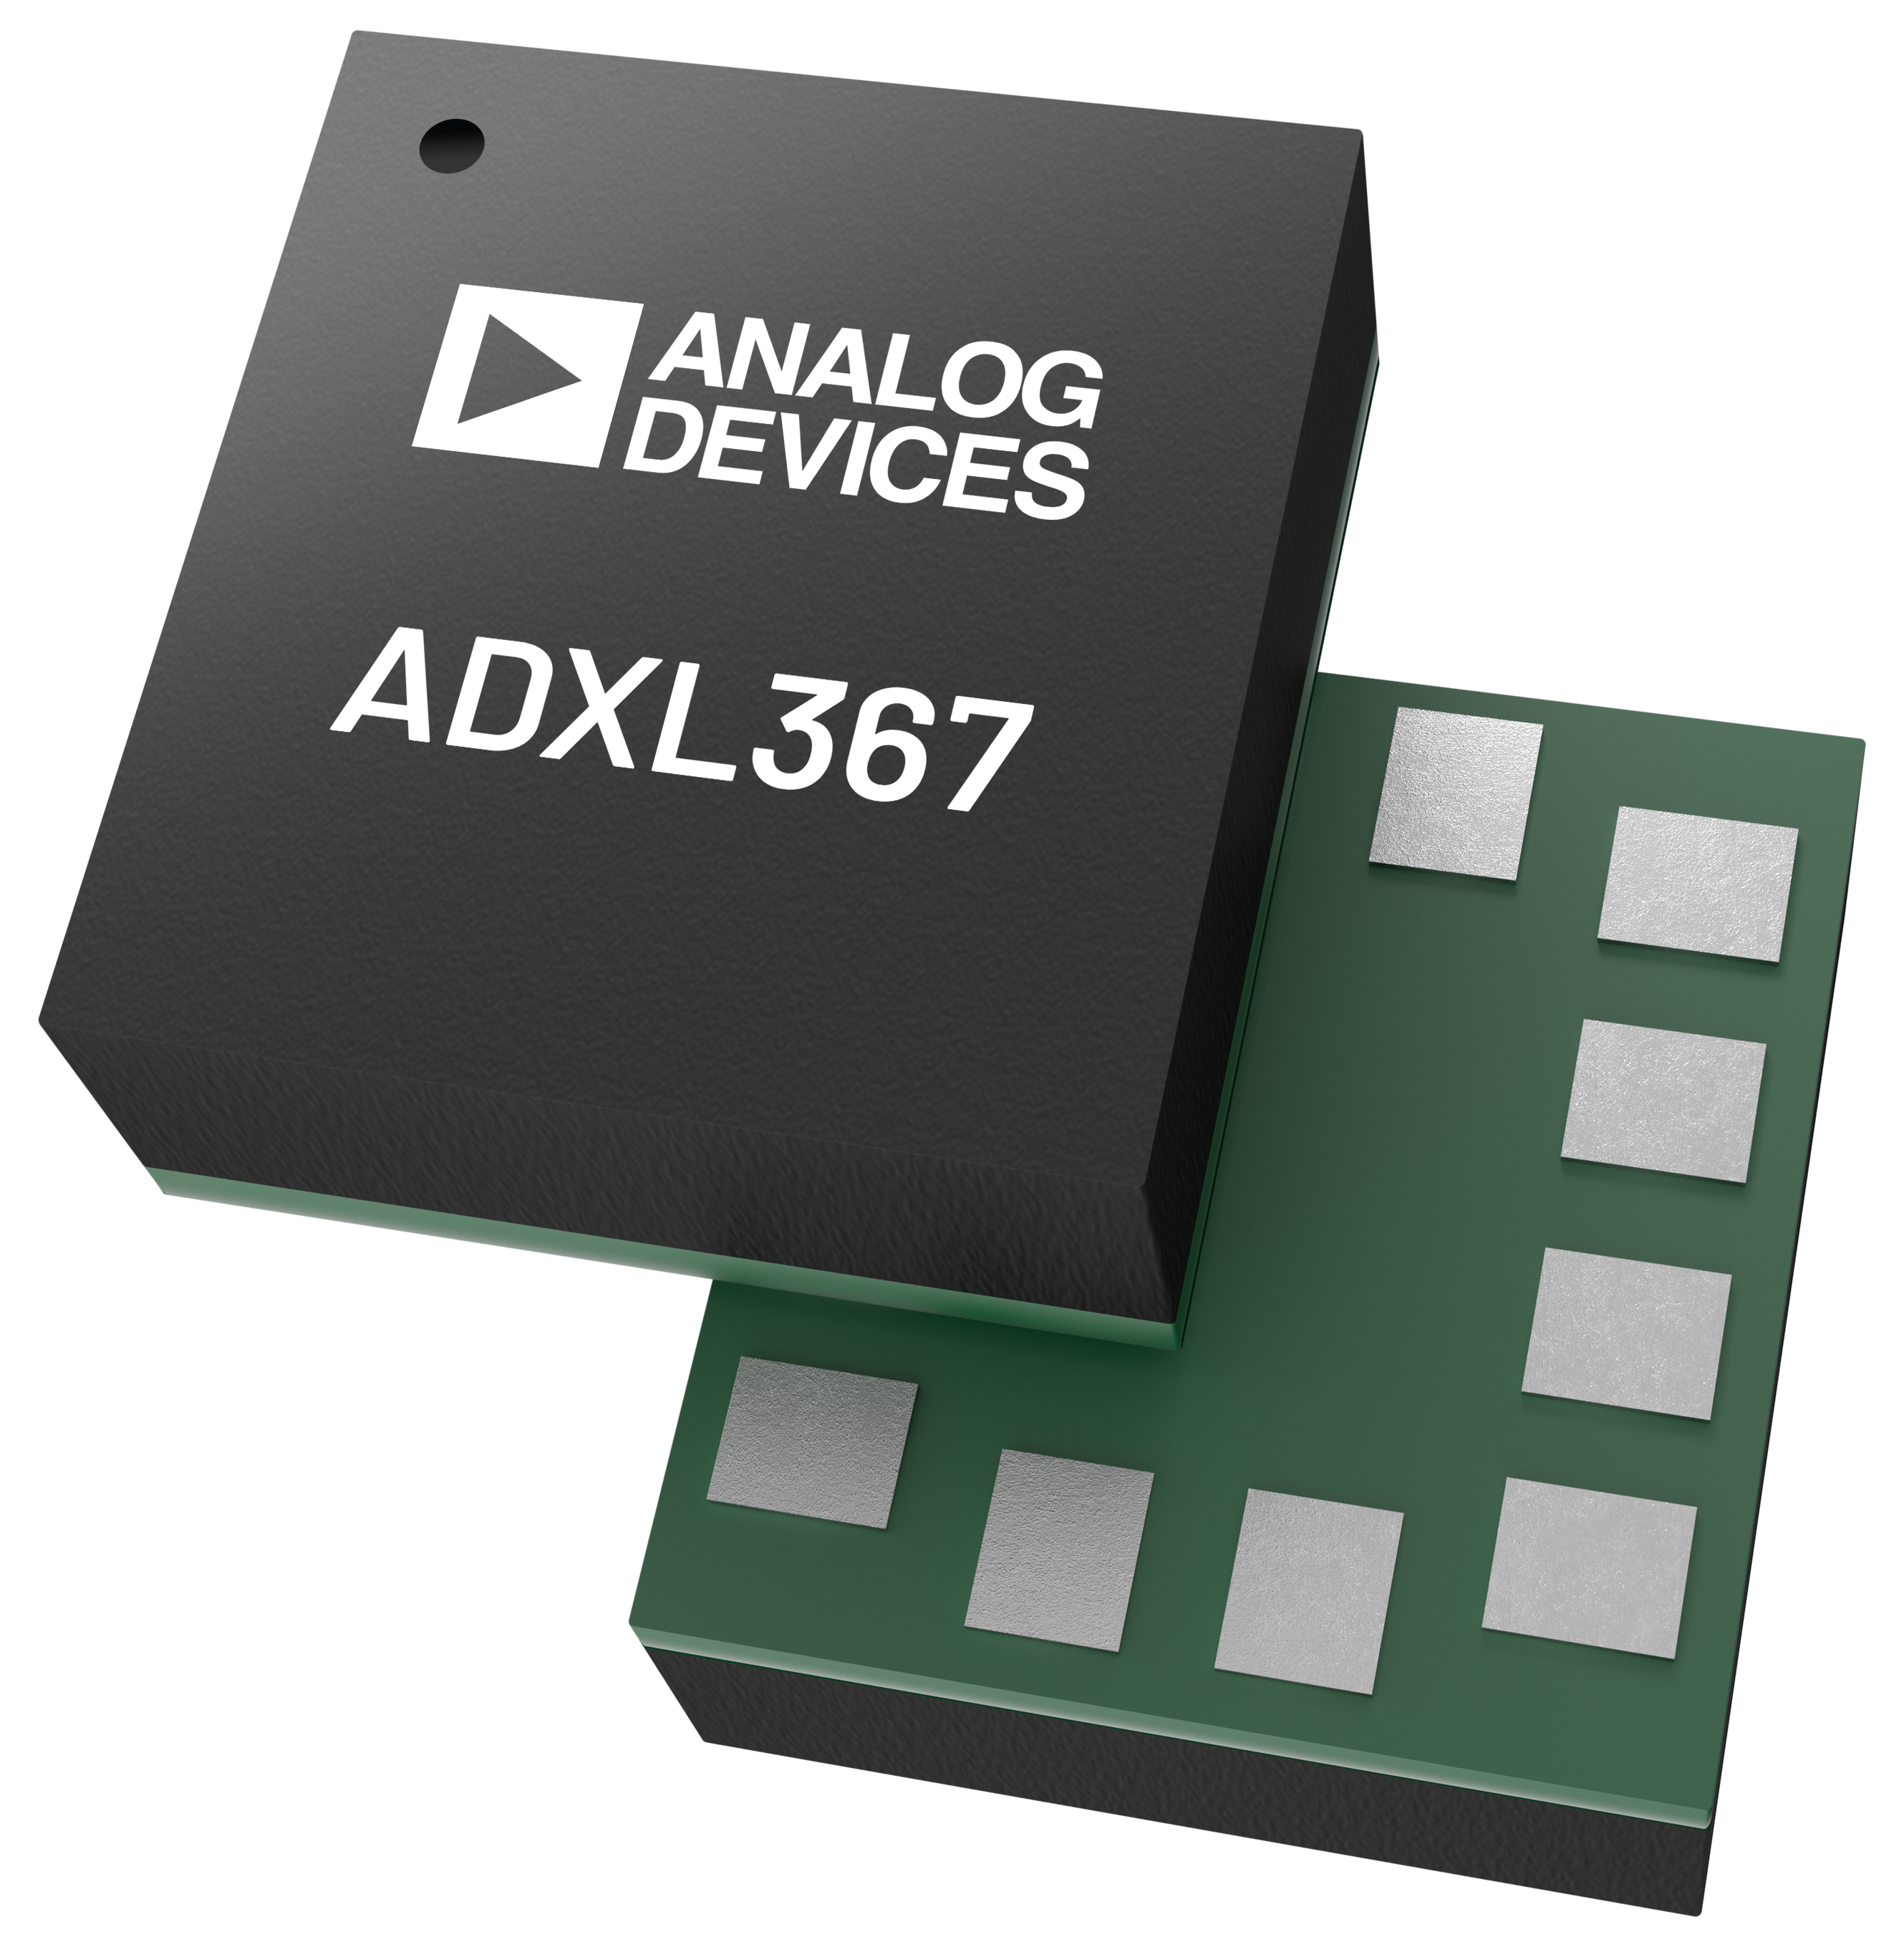 MEMS accelerometer is aimed at healthcare, industrial applications